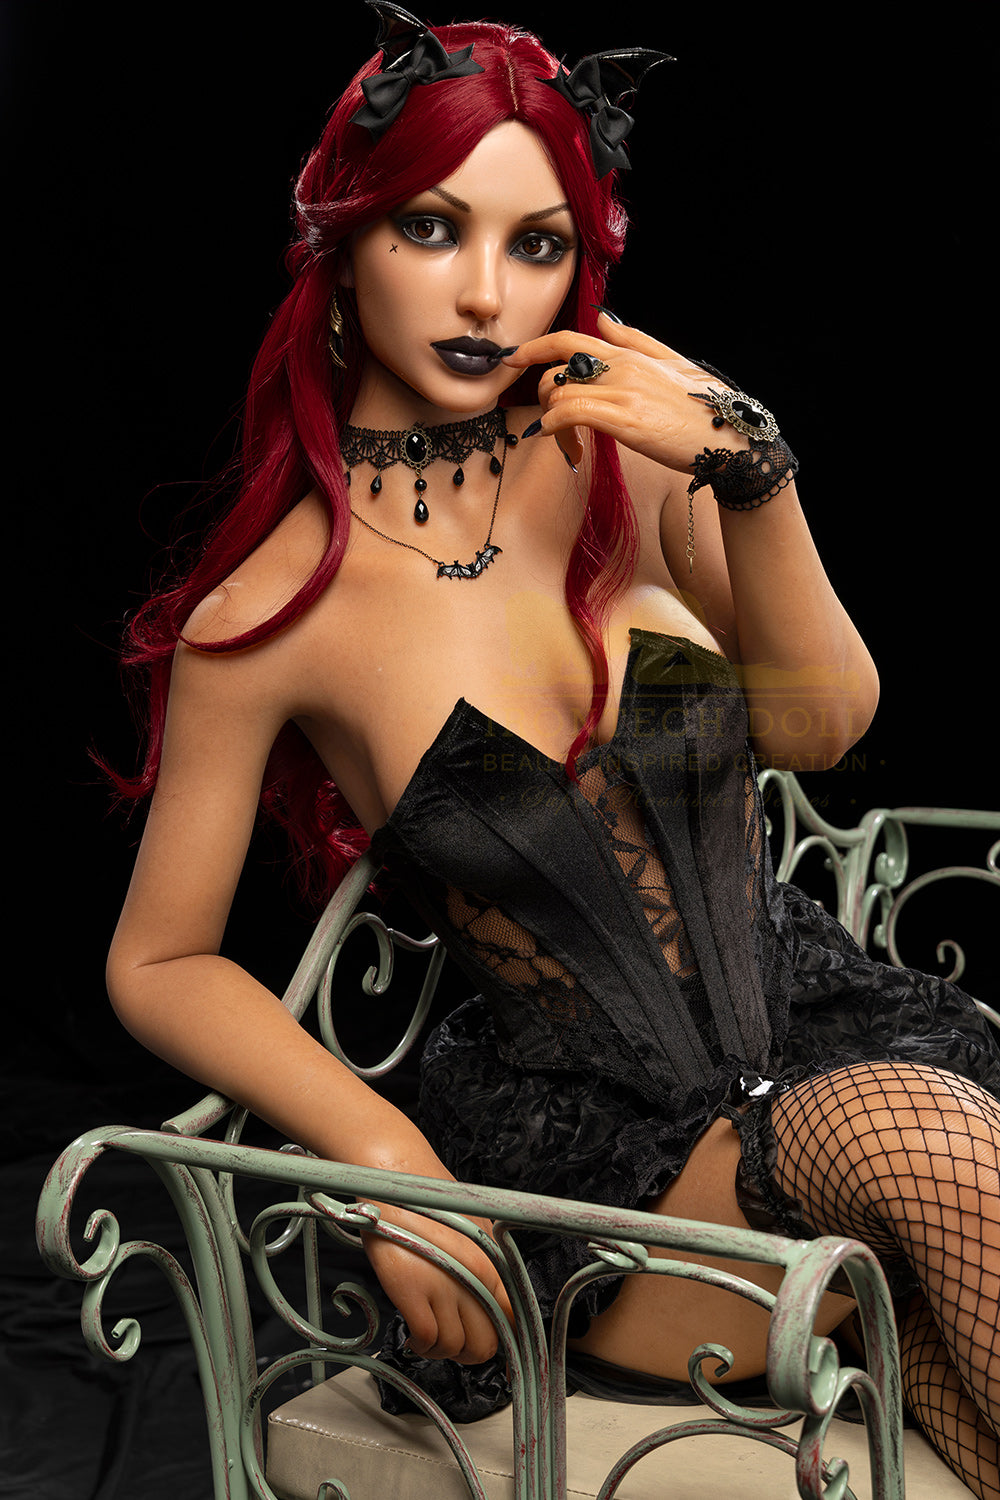 Irontechdoll Sybil 169cm Full Silicone Love Doll S47 Dark Tanned Realistic Adult Sex Doll